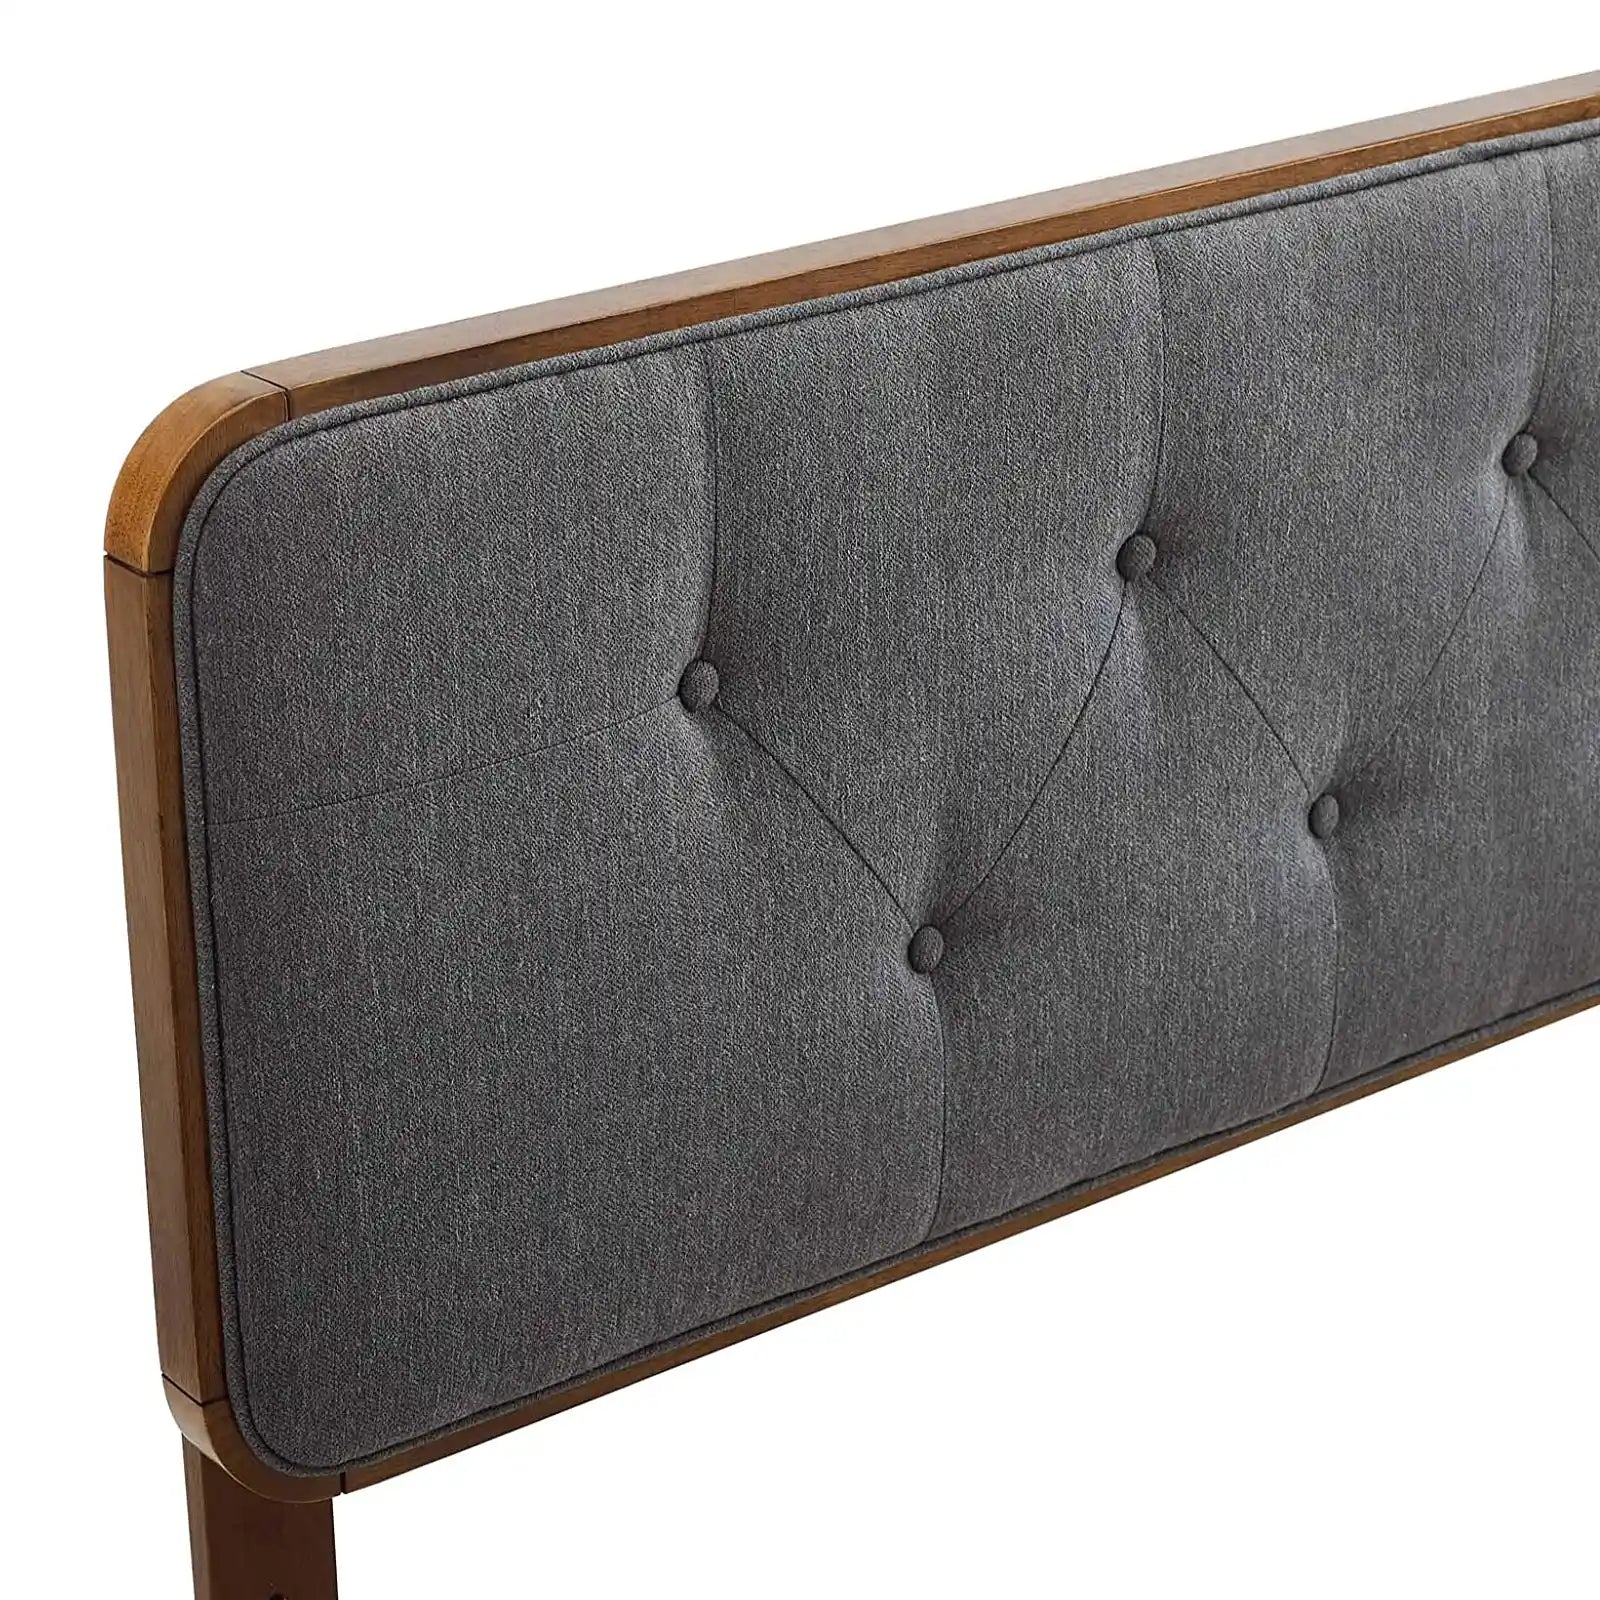 Tufted Fabric and Wood Queen Headboard in Walnut Charcoal